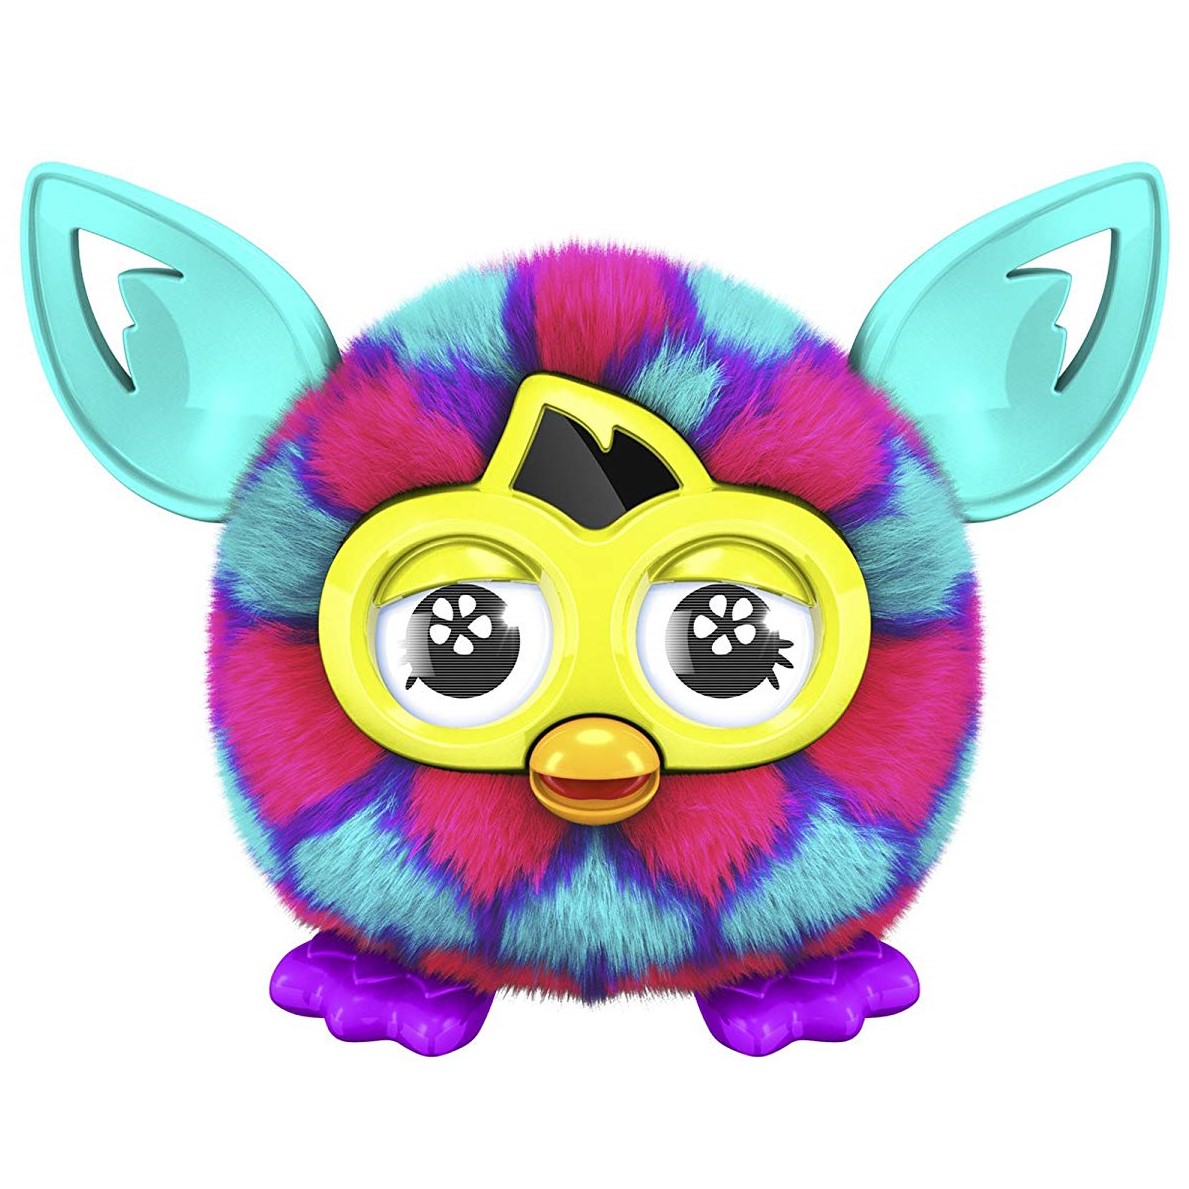 Listings for the new babies/furblings have been discovered, officially  known as Furby Furblets! : r/furby